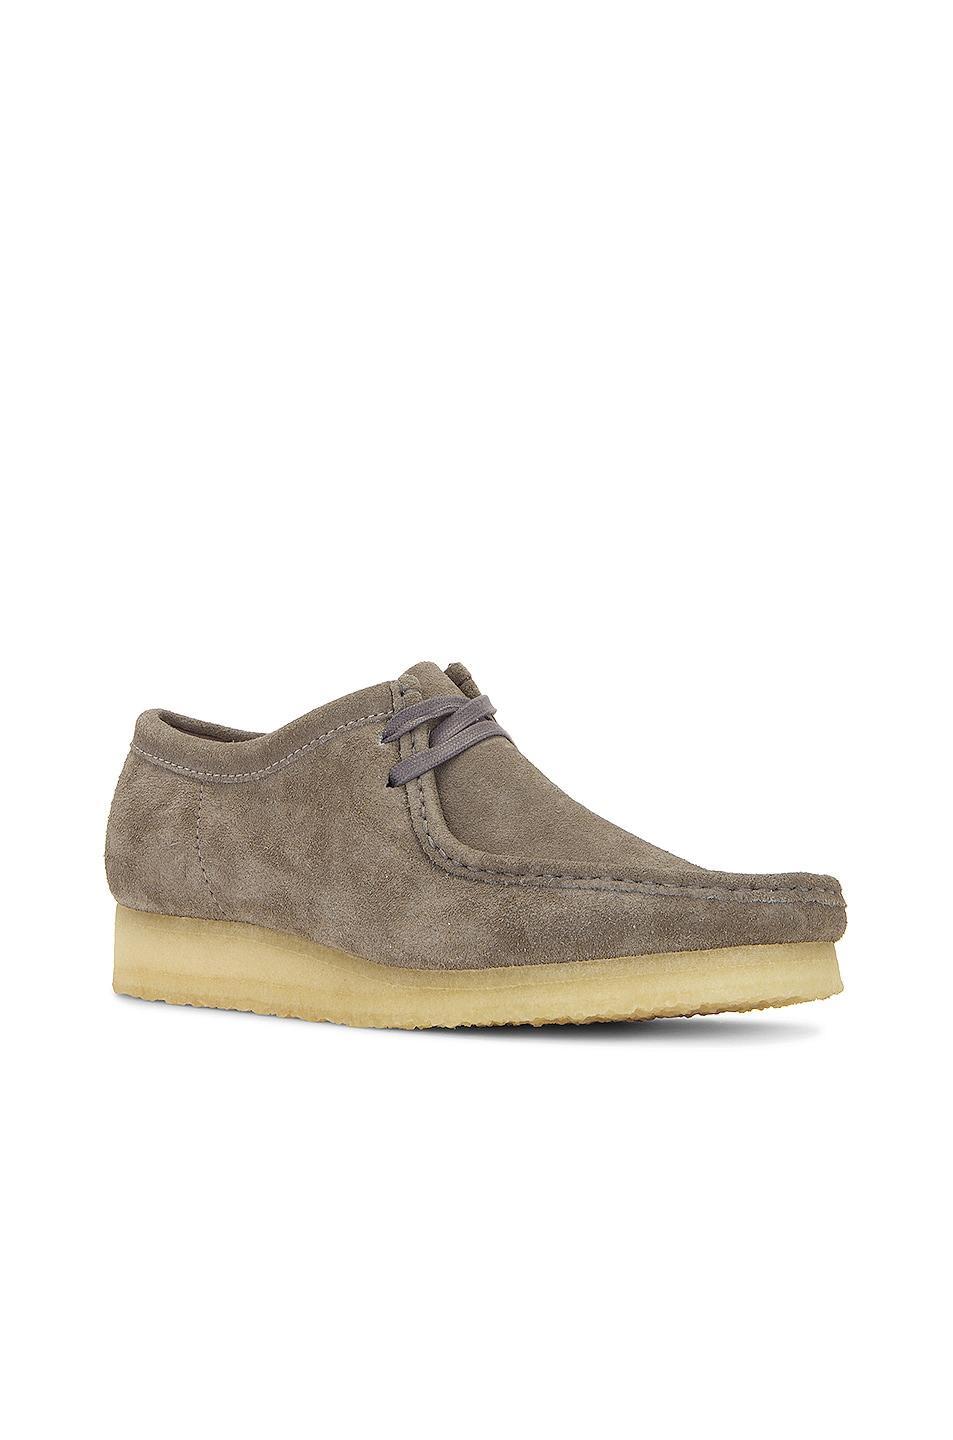 Clarks Wallabee in Grey Suede - Grey. Size 10 (also in 7, 7.5, 8, 8.5, 10.5, 12). Product Image